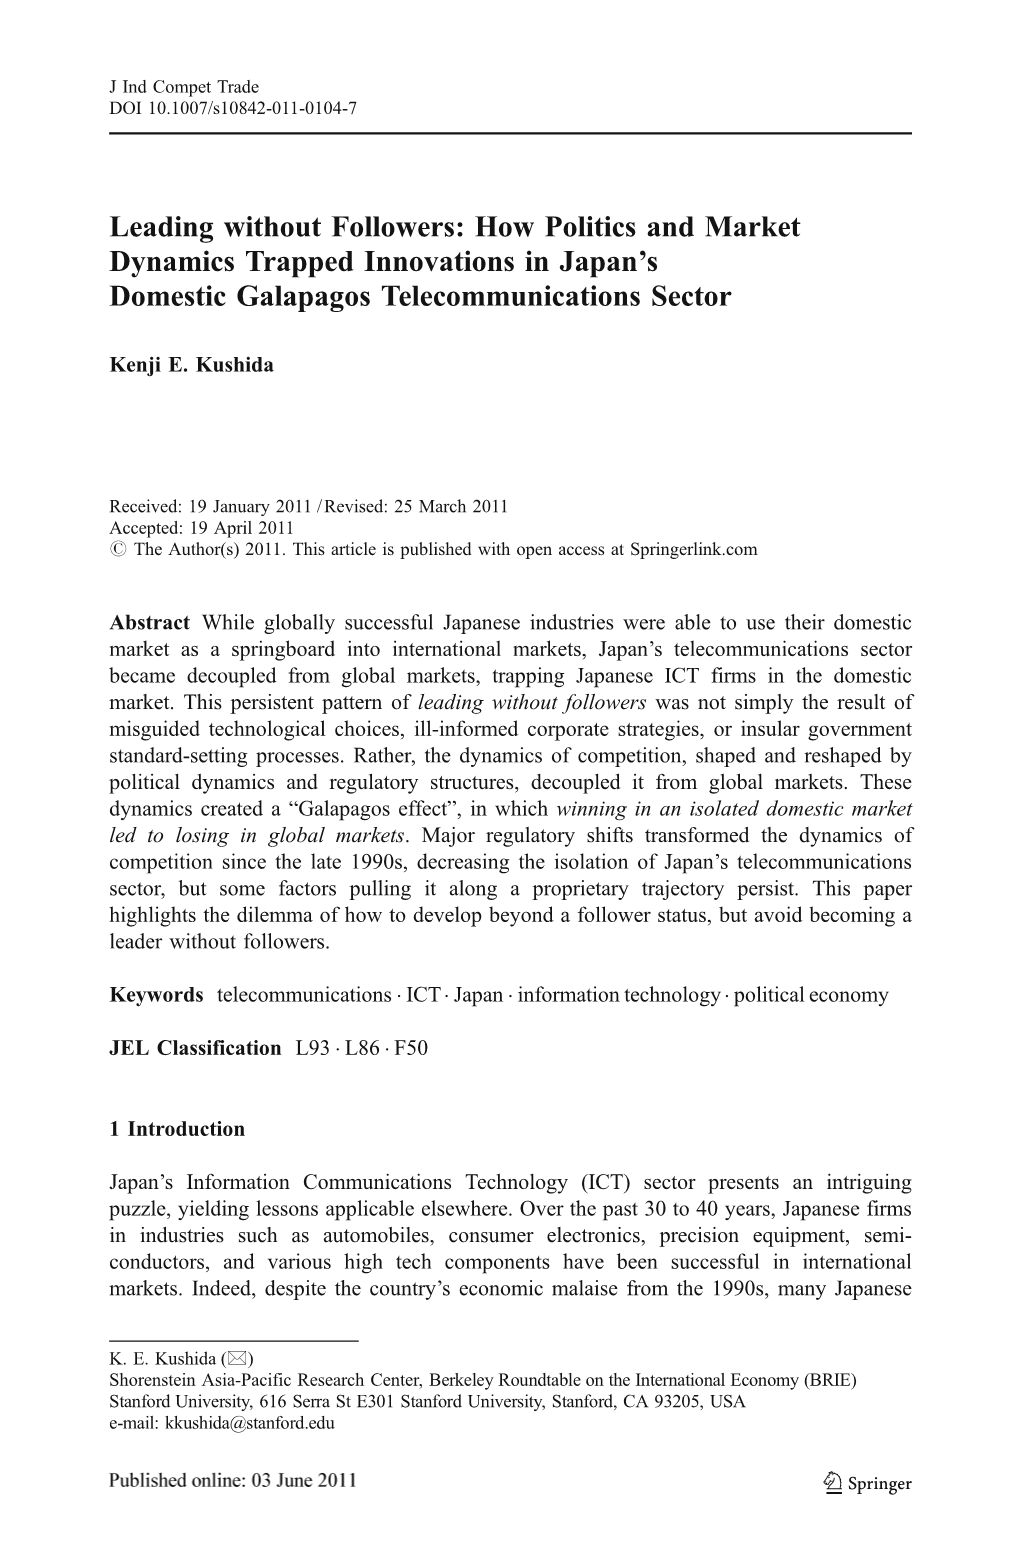 Leading Without Followers: How Politics and Market Dynamics Trapped Innovations in Japan’S Domestic Galapagos Telecommunications Sector